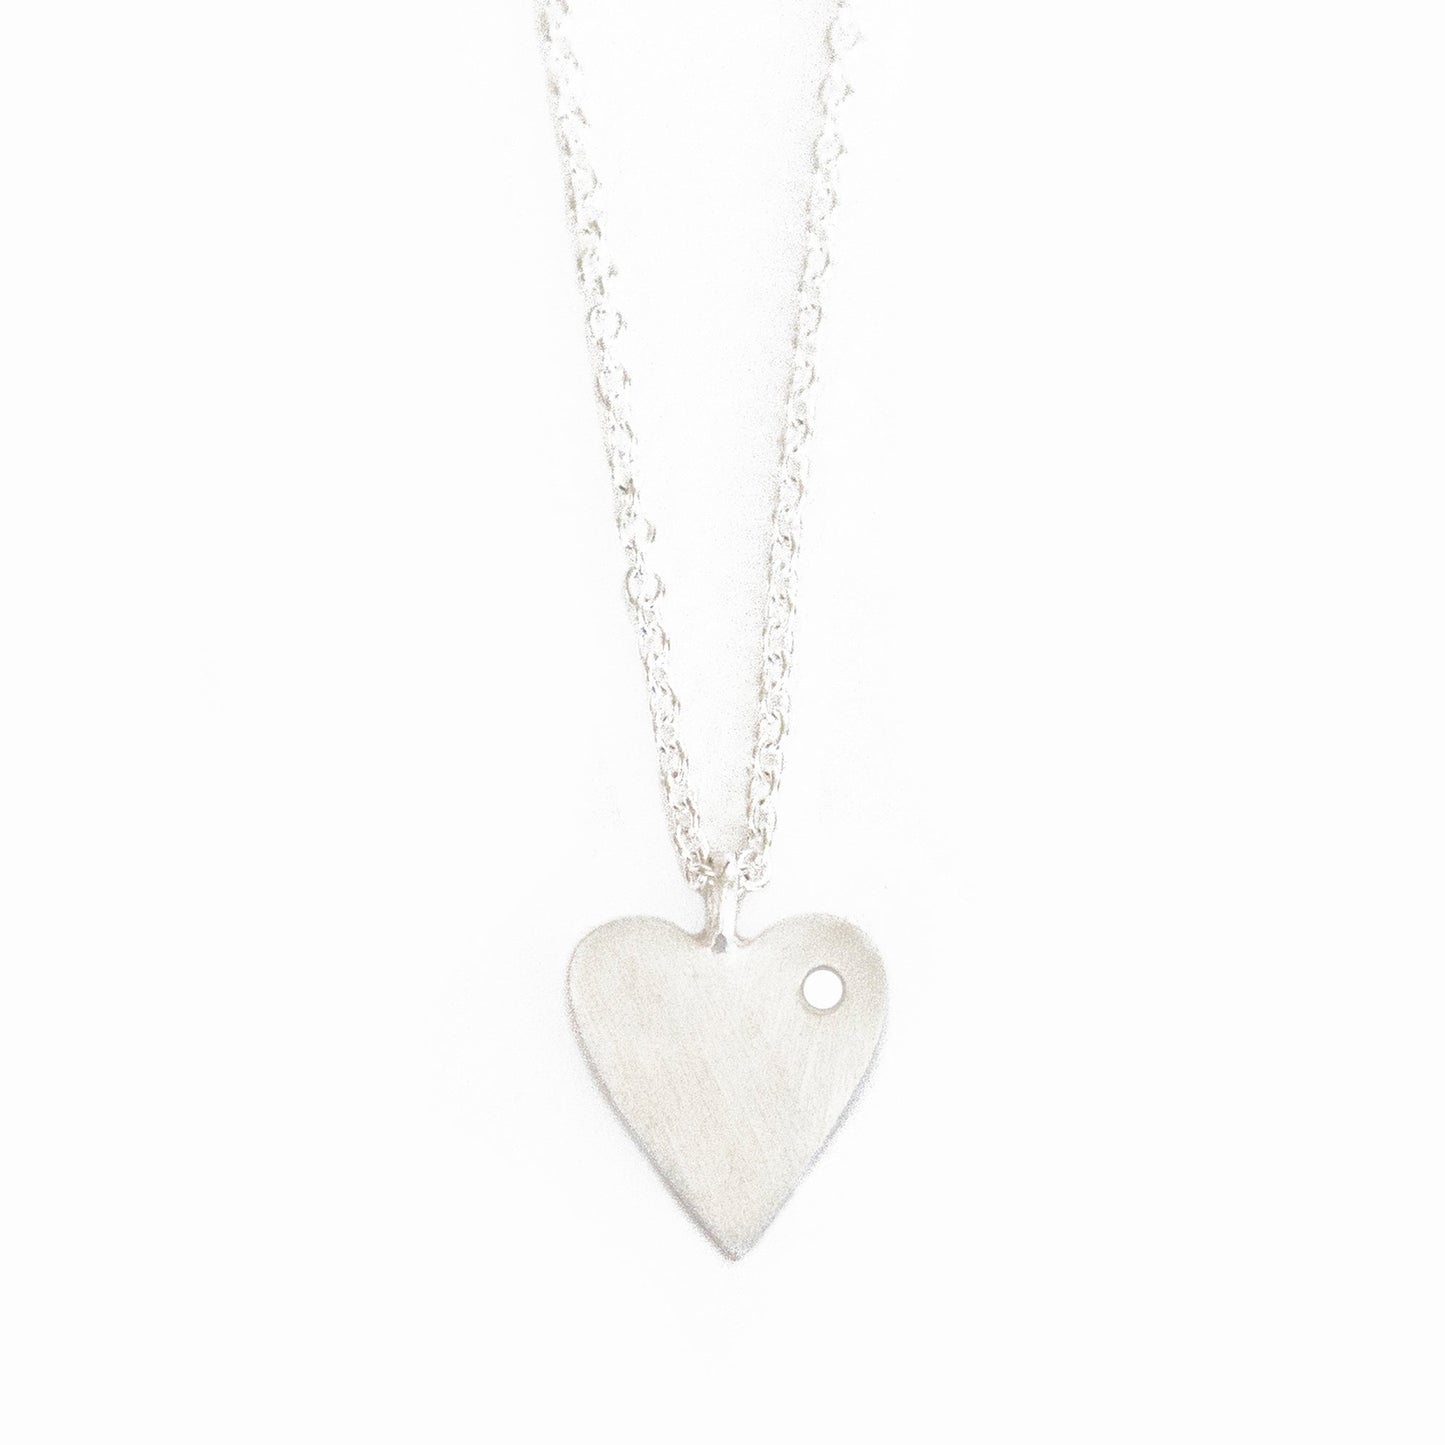 silverpolished-heart-necklace